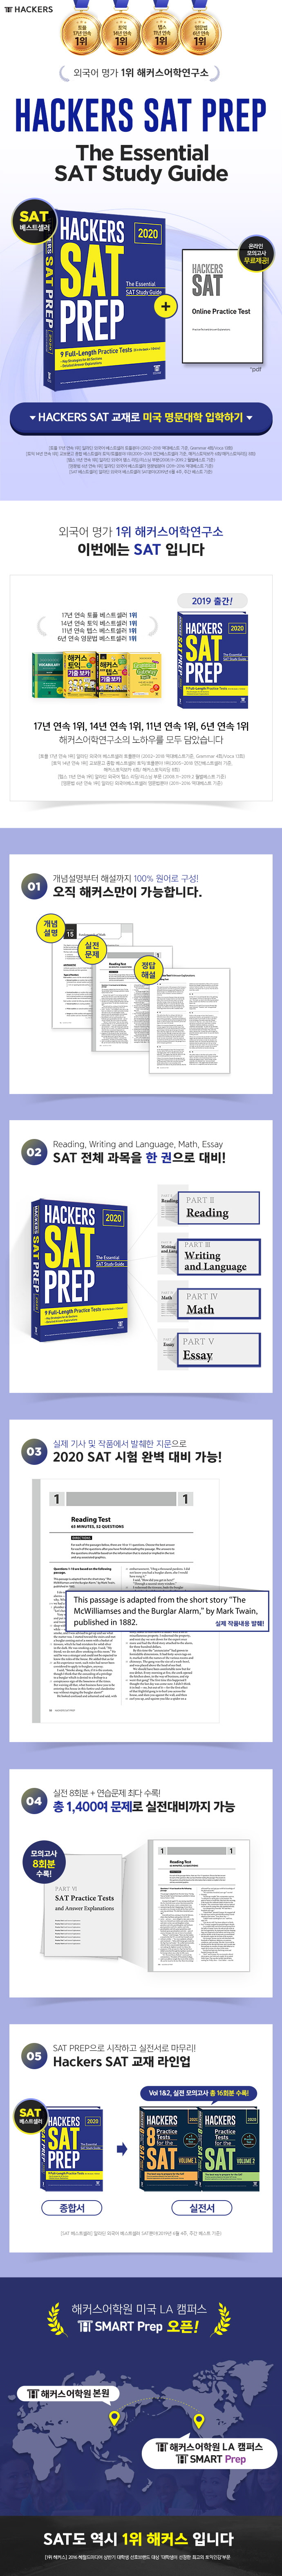 HACKERS SAT PREP: The Essential SAT Study Guide(2021) 도서 상세이미지